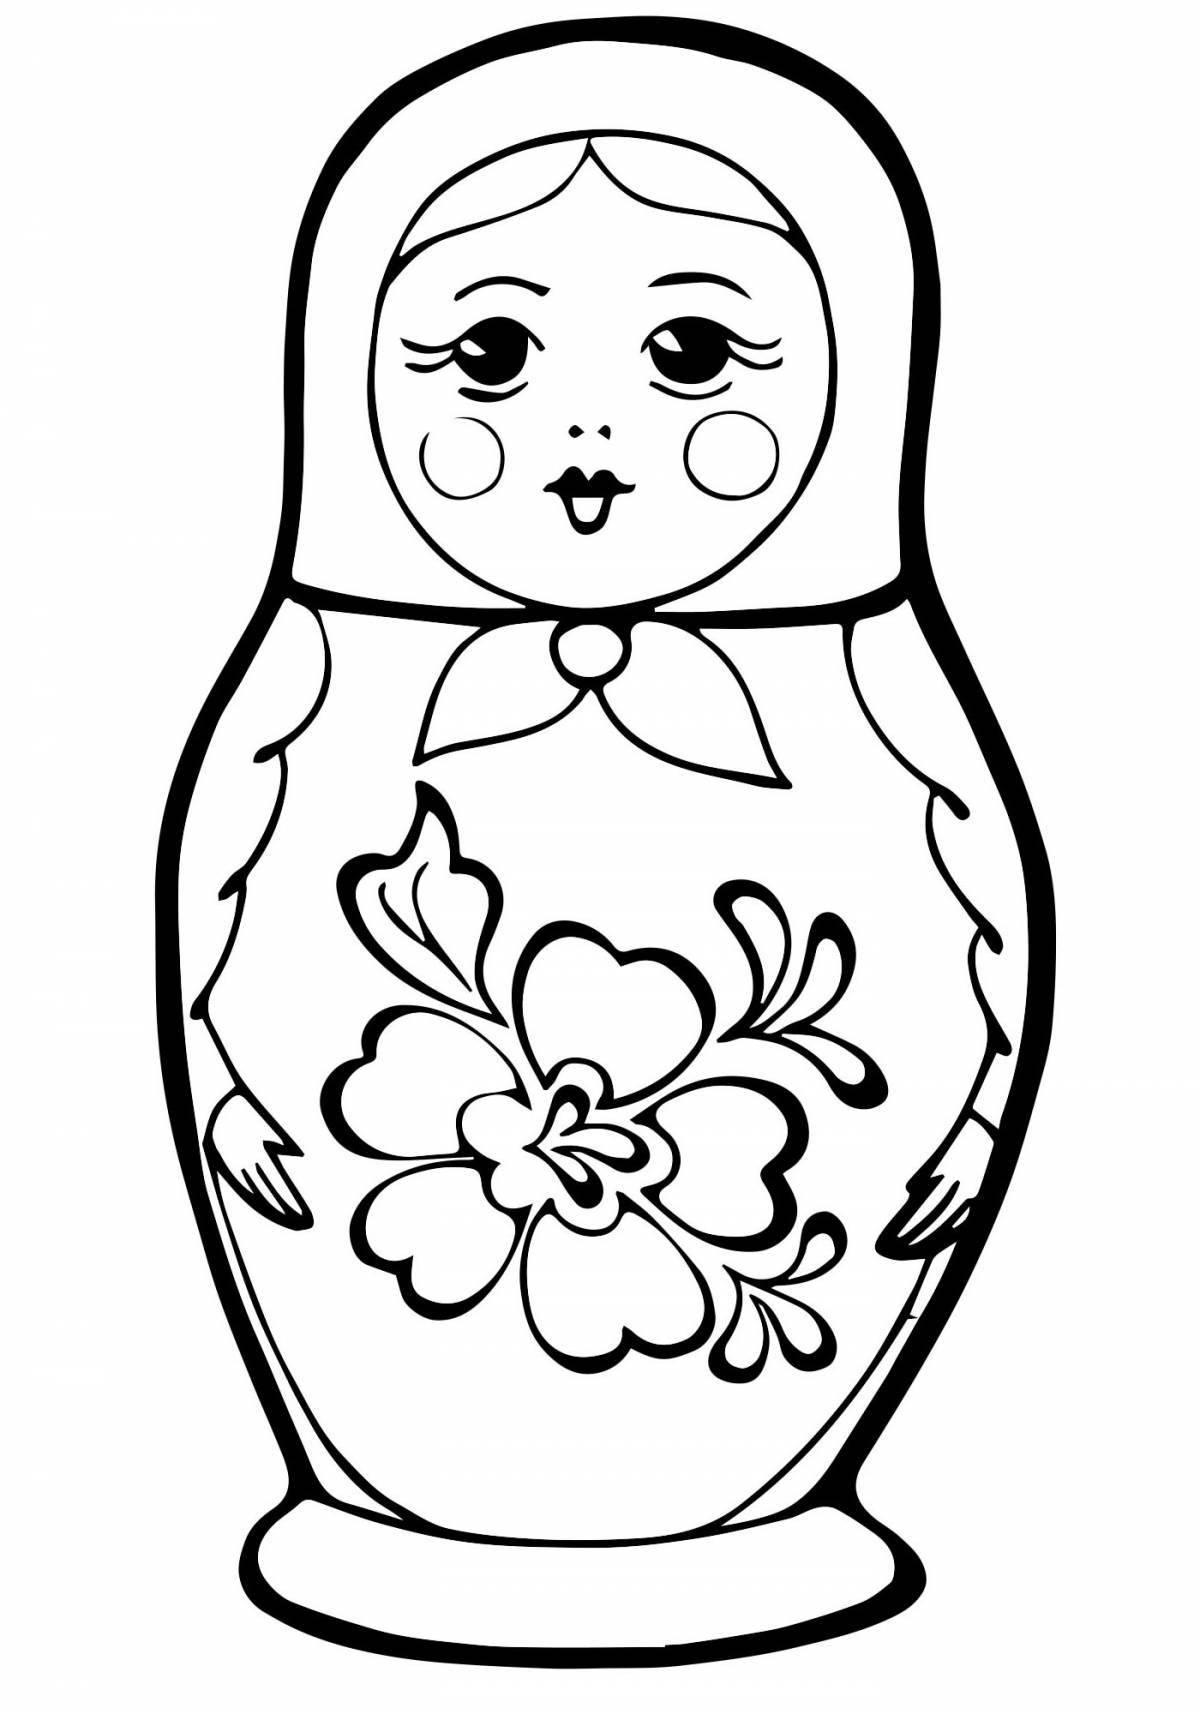 Colored Russian doll coloring book